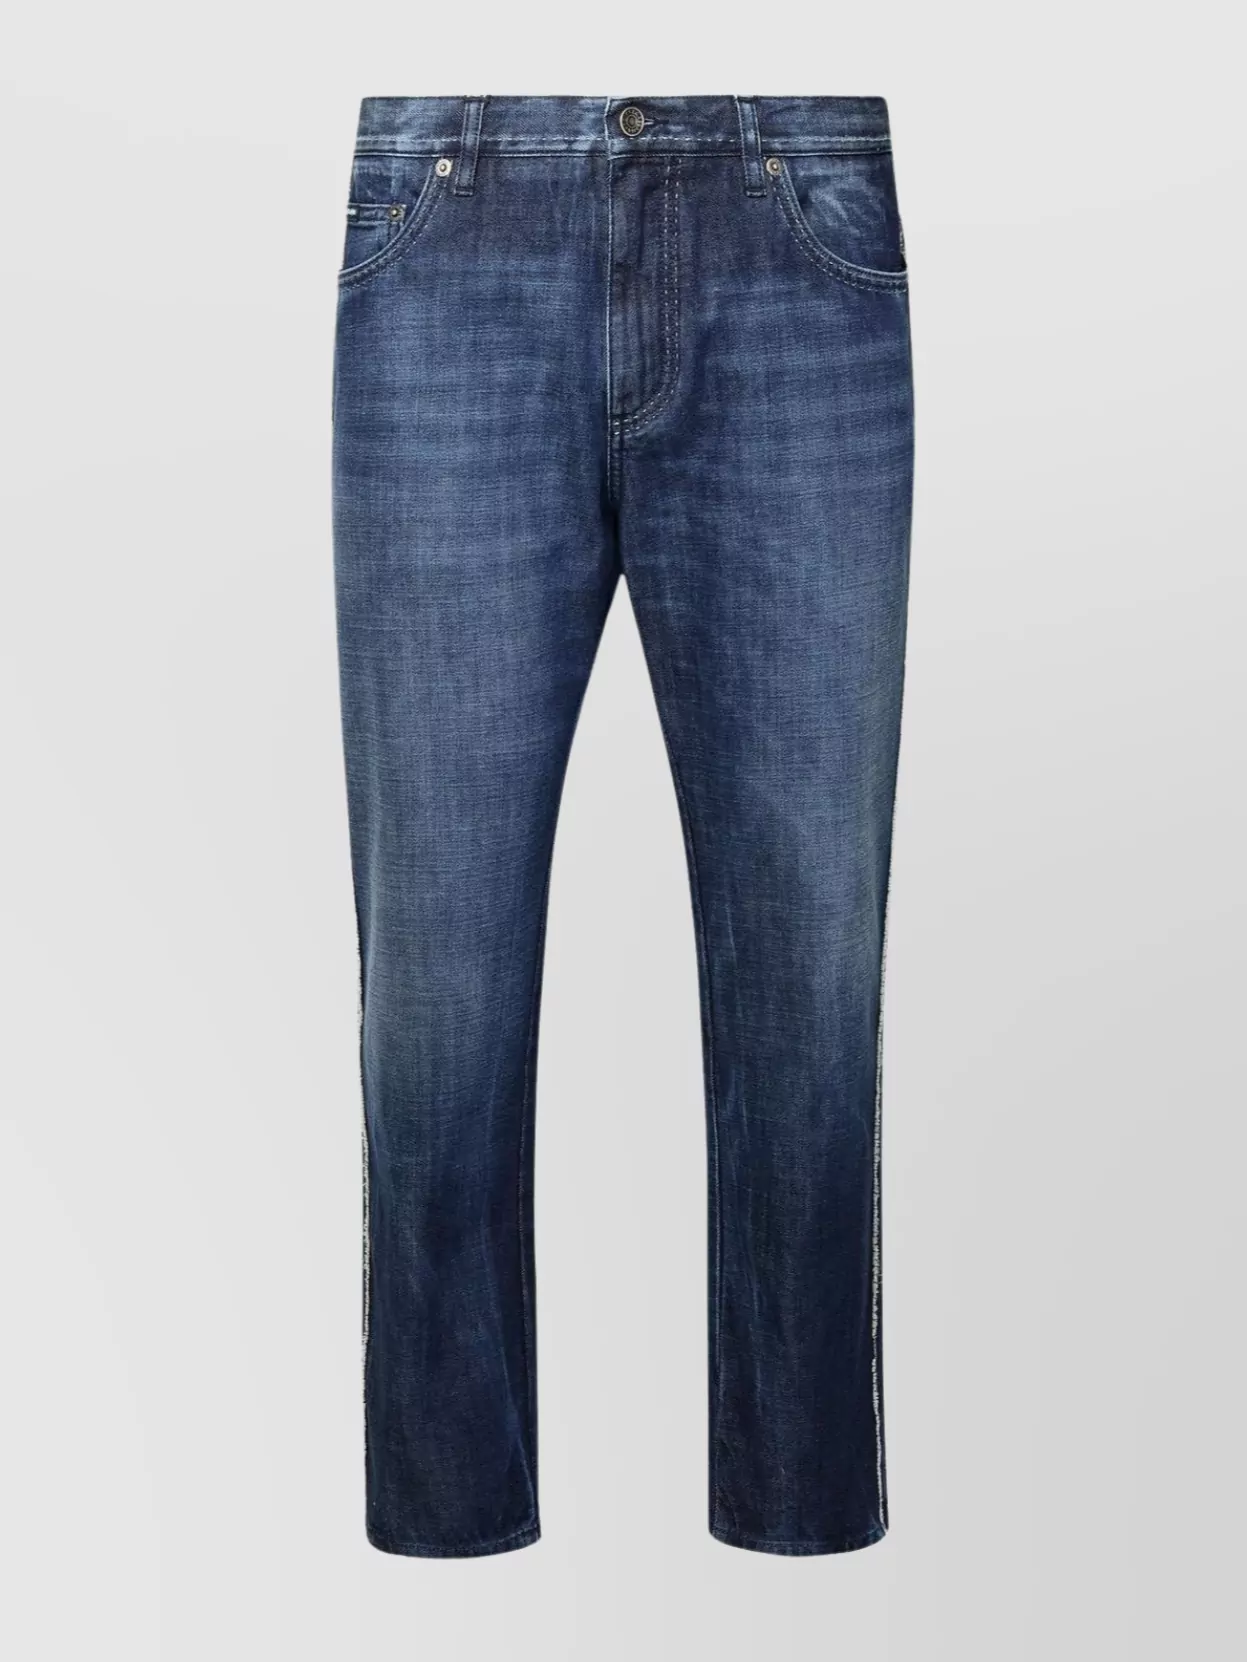 Dolce & Gabbana Faded Stitched Cotton Jeans With Back Pockets In Blue